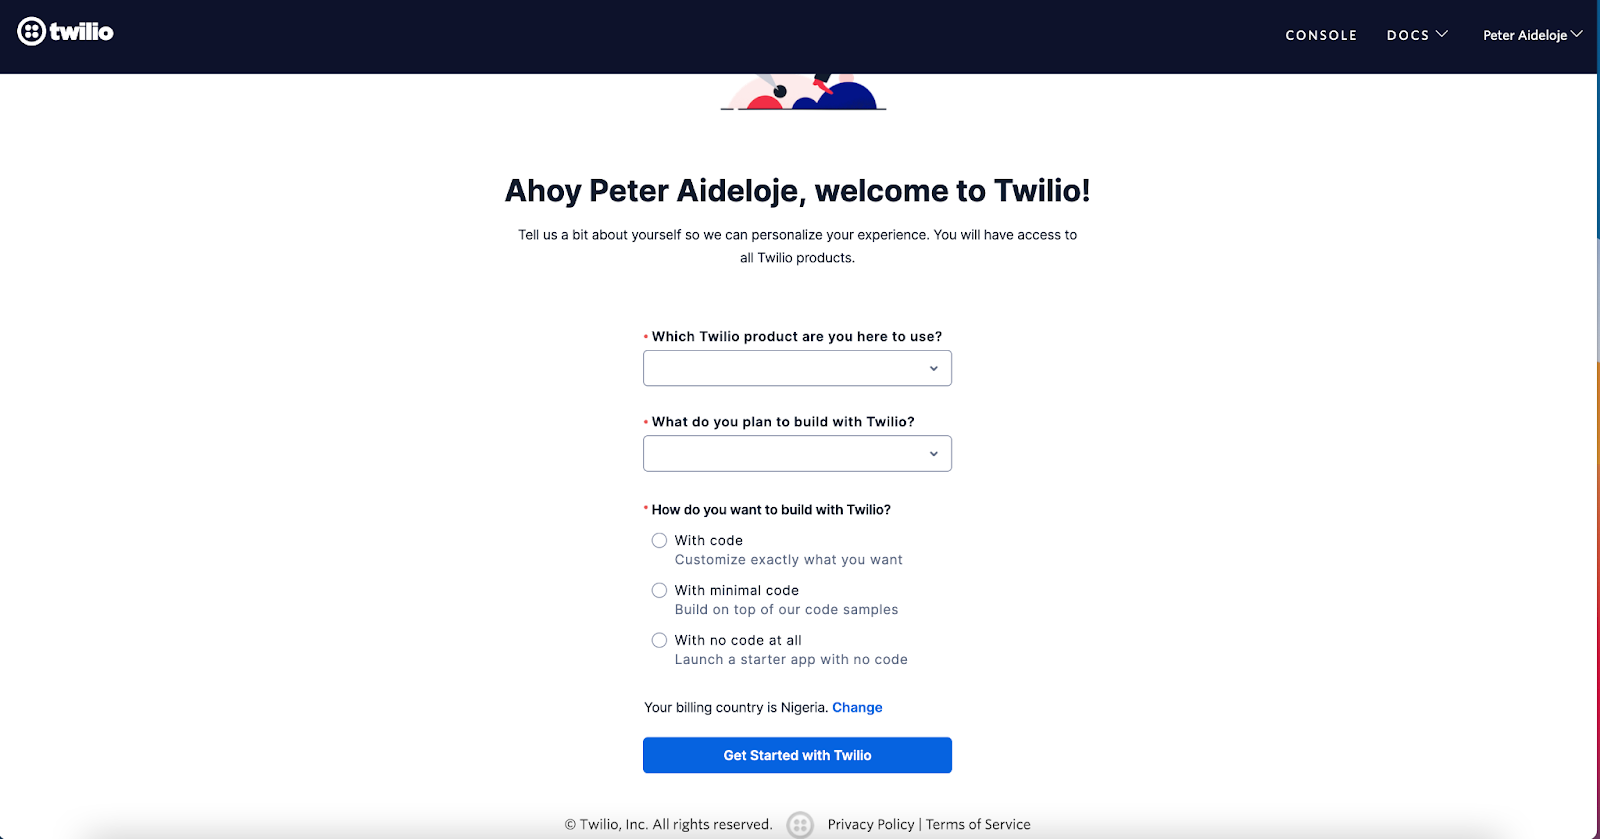 image showing welcome message on successful twilio account sign-up